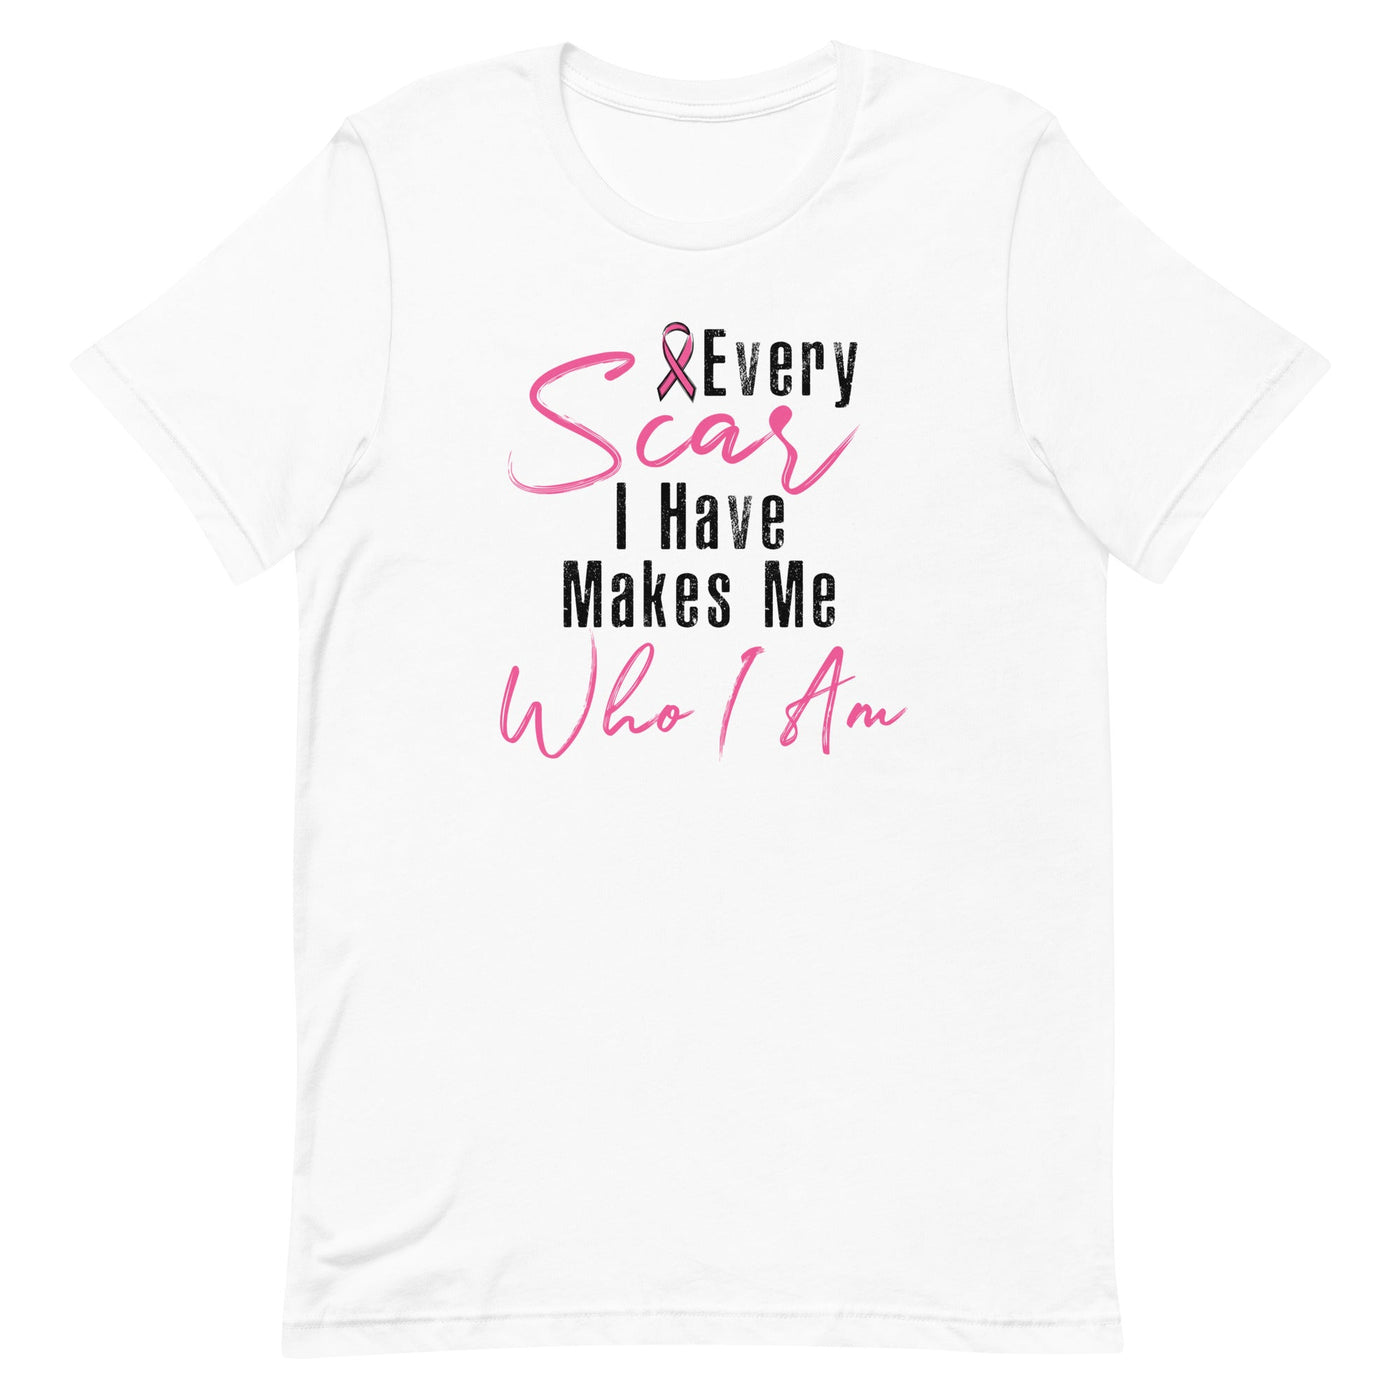 EVERY SCAR I HAVE MAKES ME WHO I AM WOMEN'S T-SHIRT- BLACK AND PINK FONT White S 